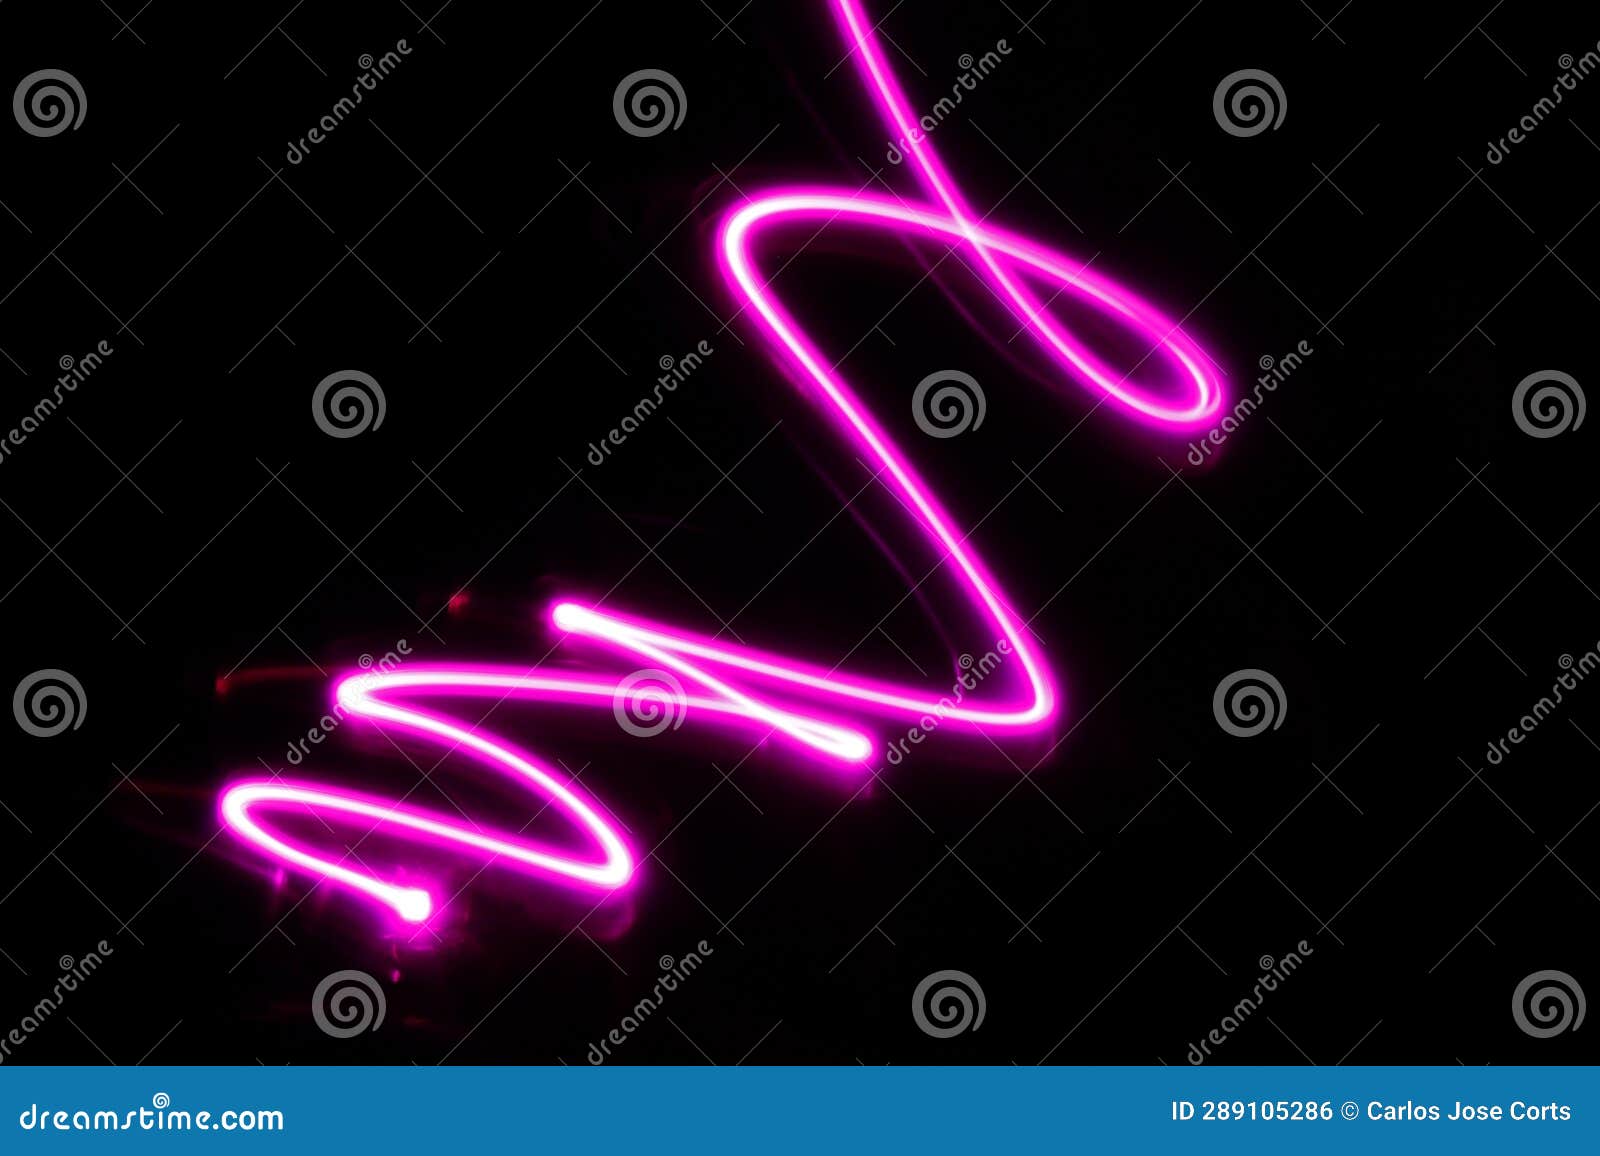 pink scribble with low energy dichroic light with black background.